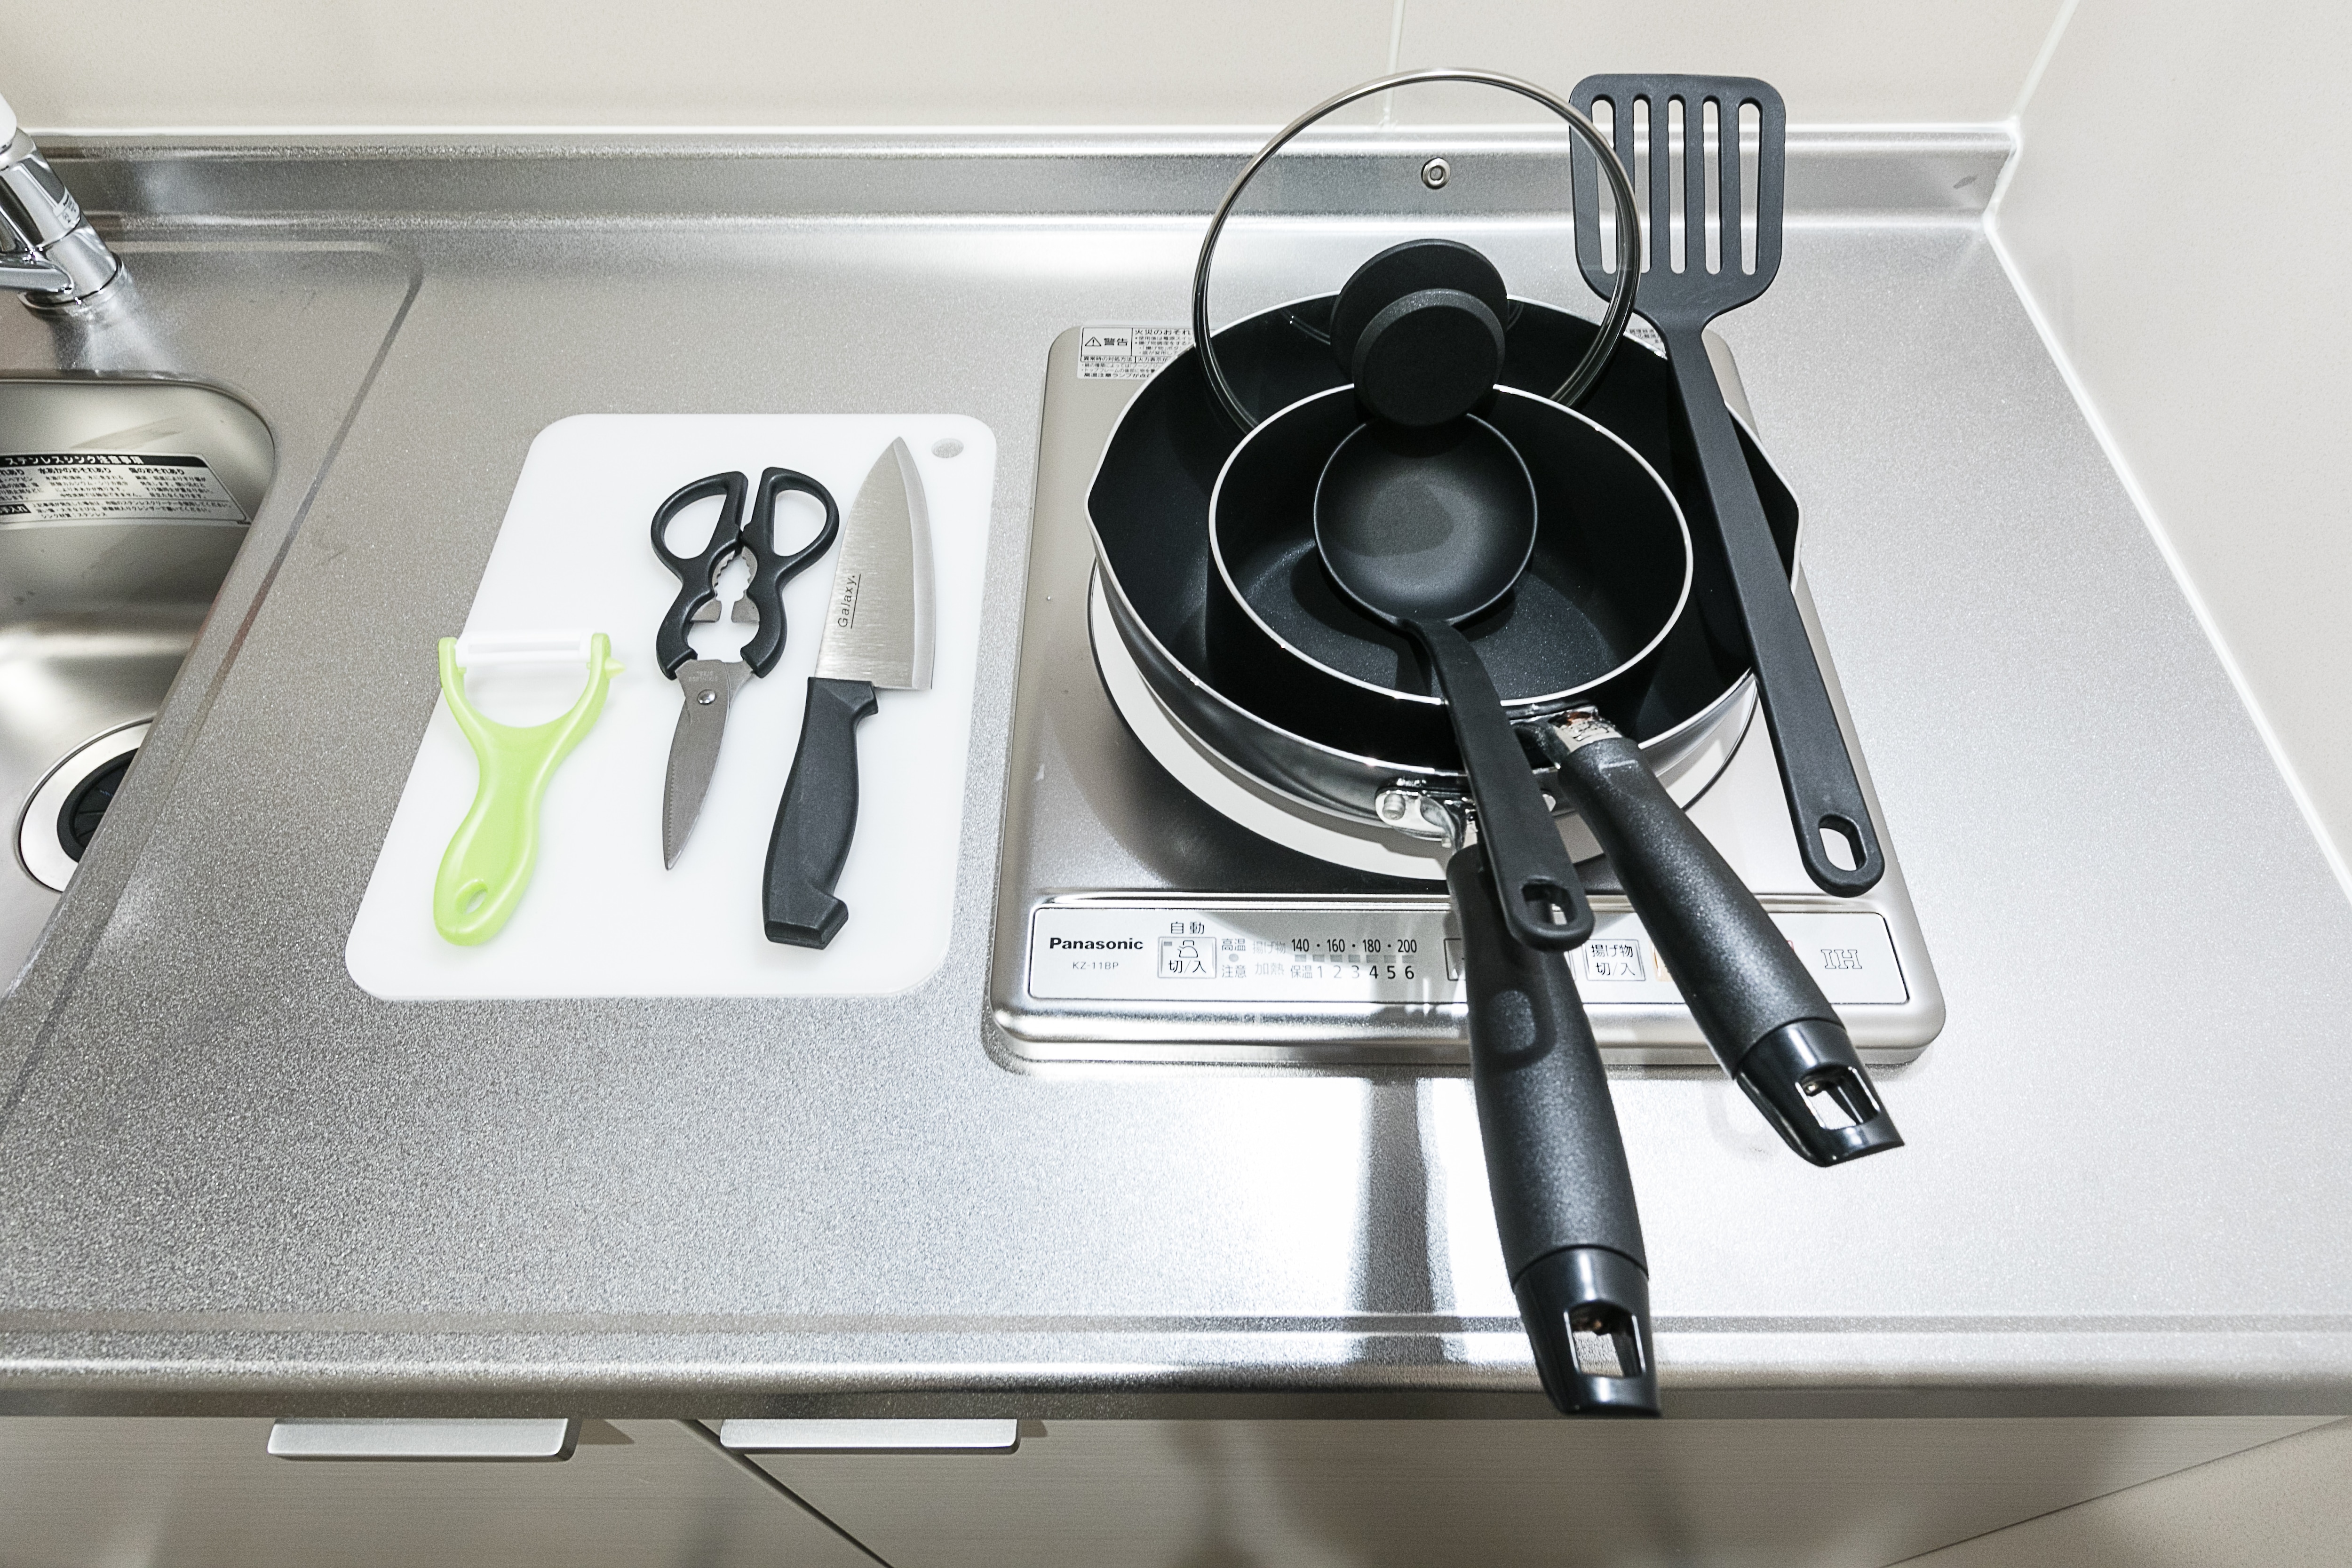 We are fully equipped with kitchen / cooking utensils. Please feel free to use it.